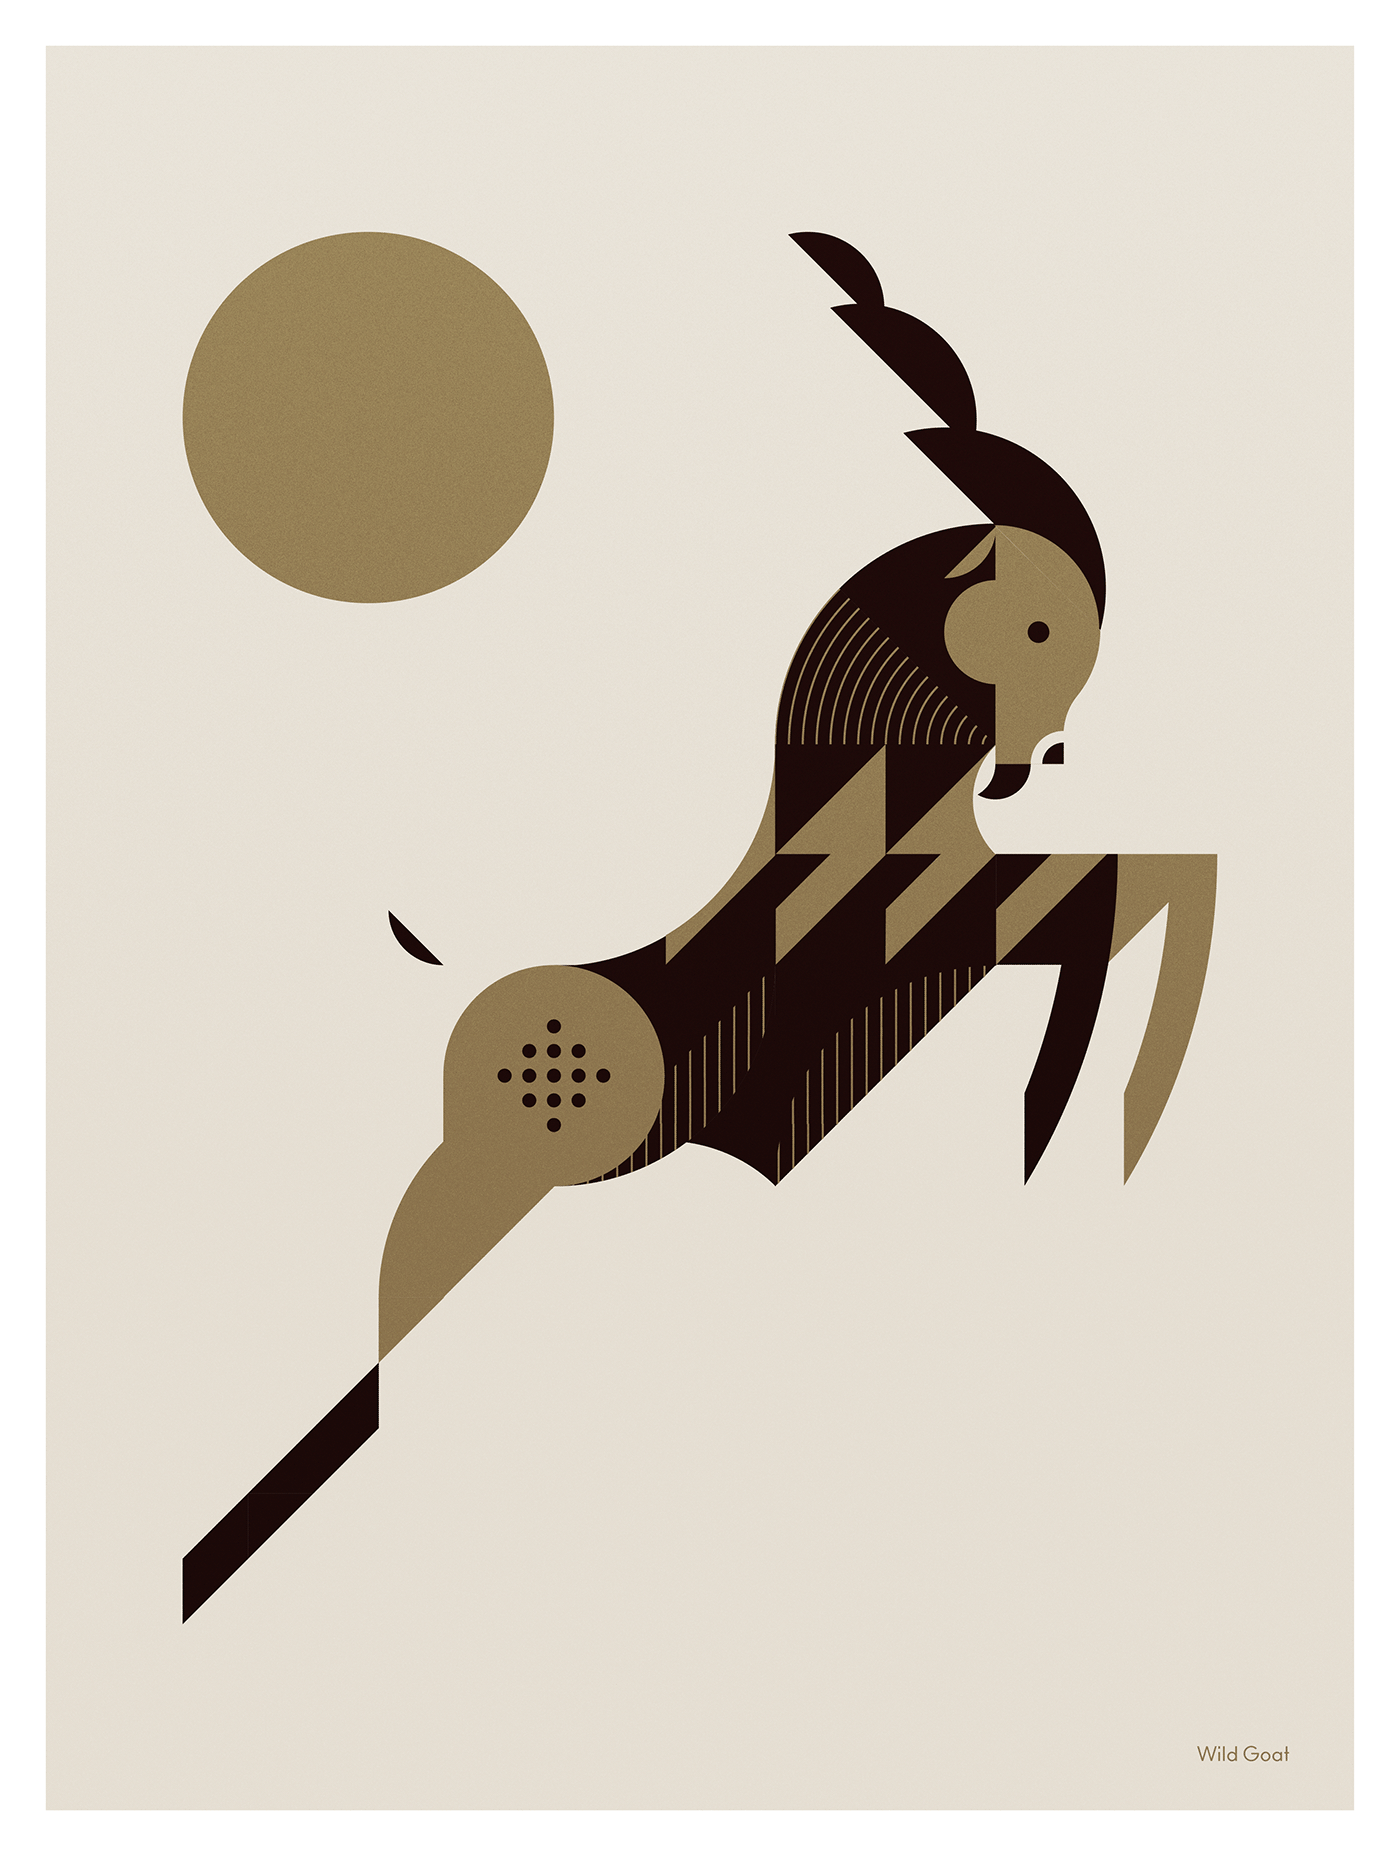 Geometric animals, poster series from Studio Soleil, that created for a various of projects. Goat.